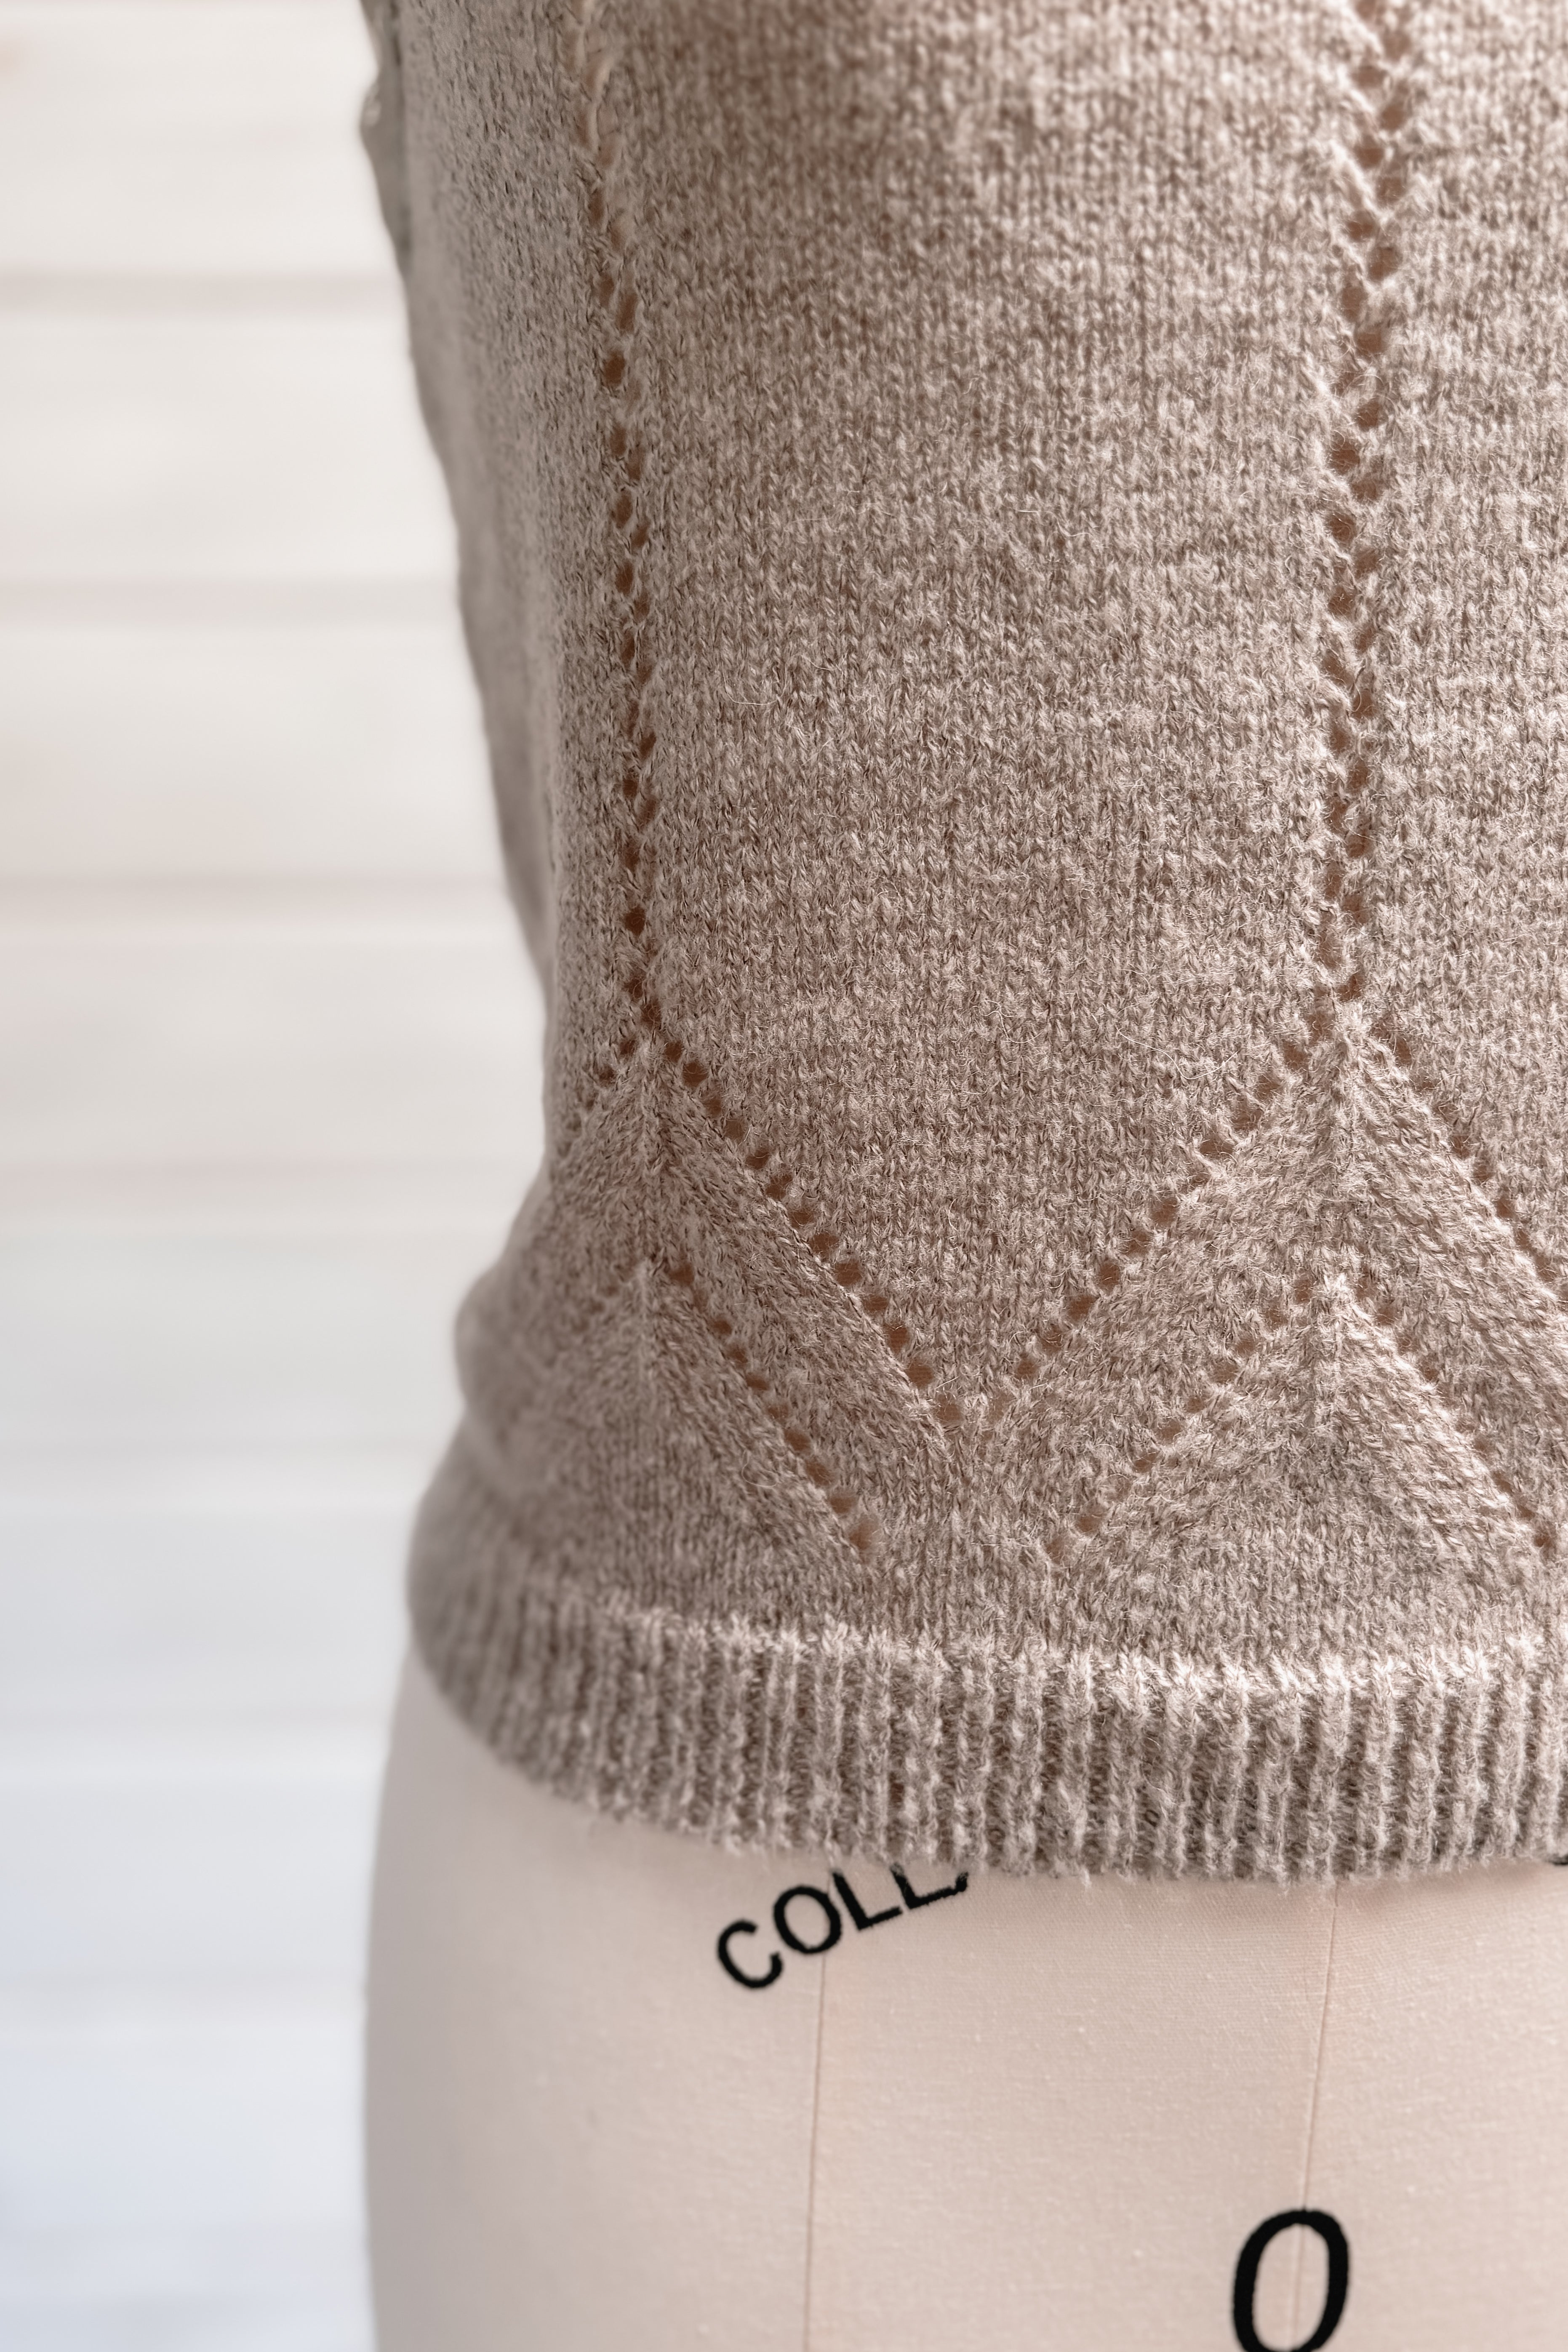 Faded Letter Knitted Camisole